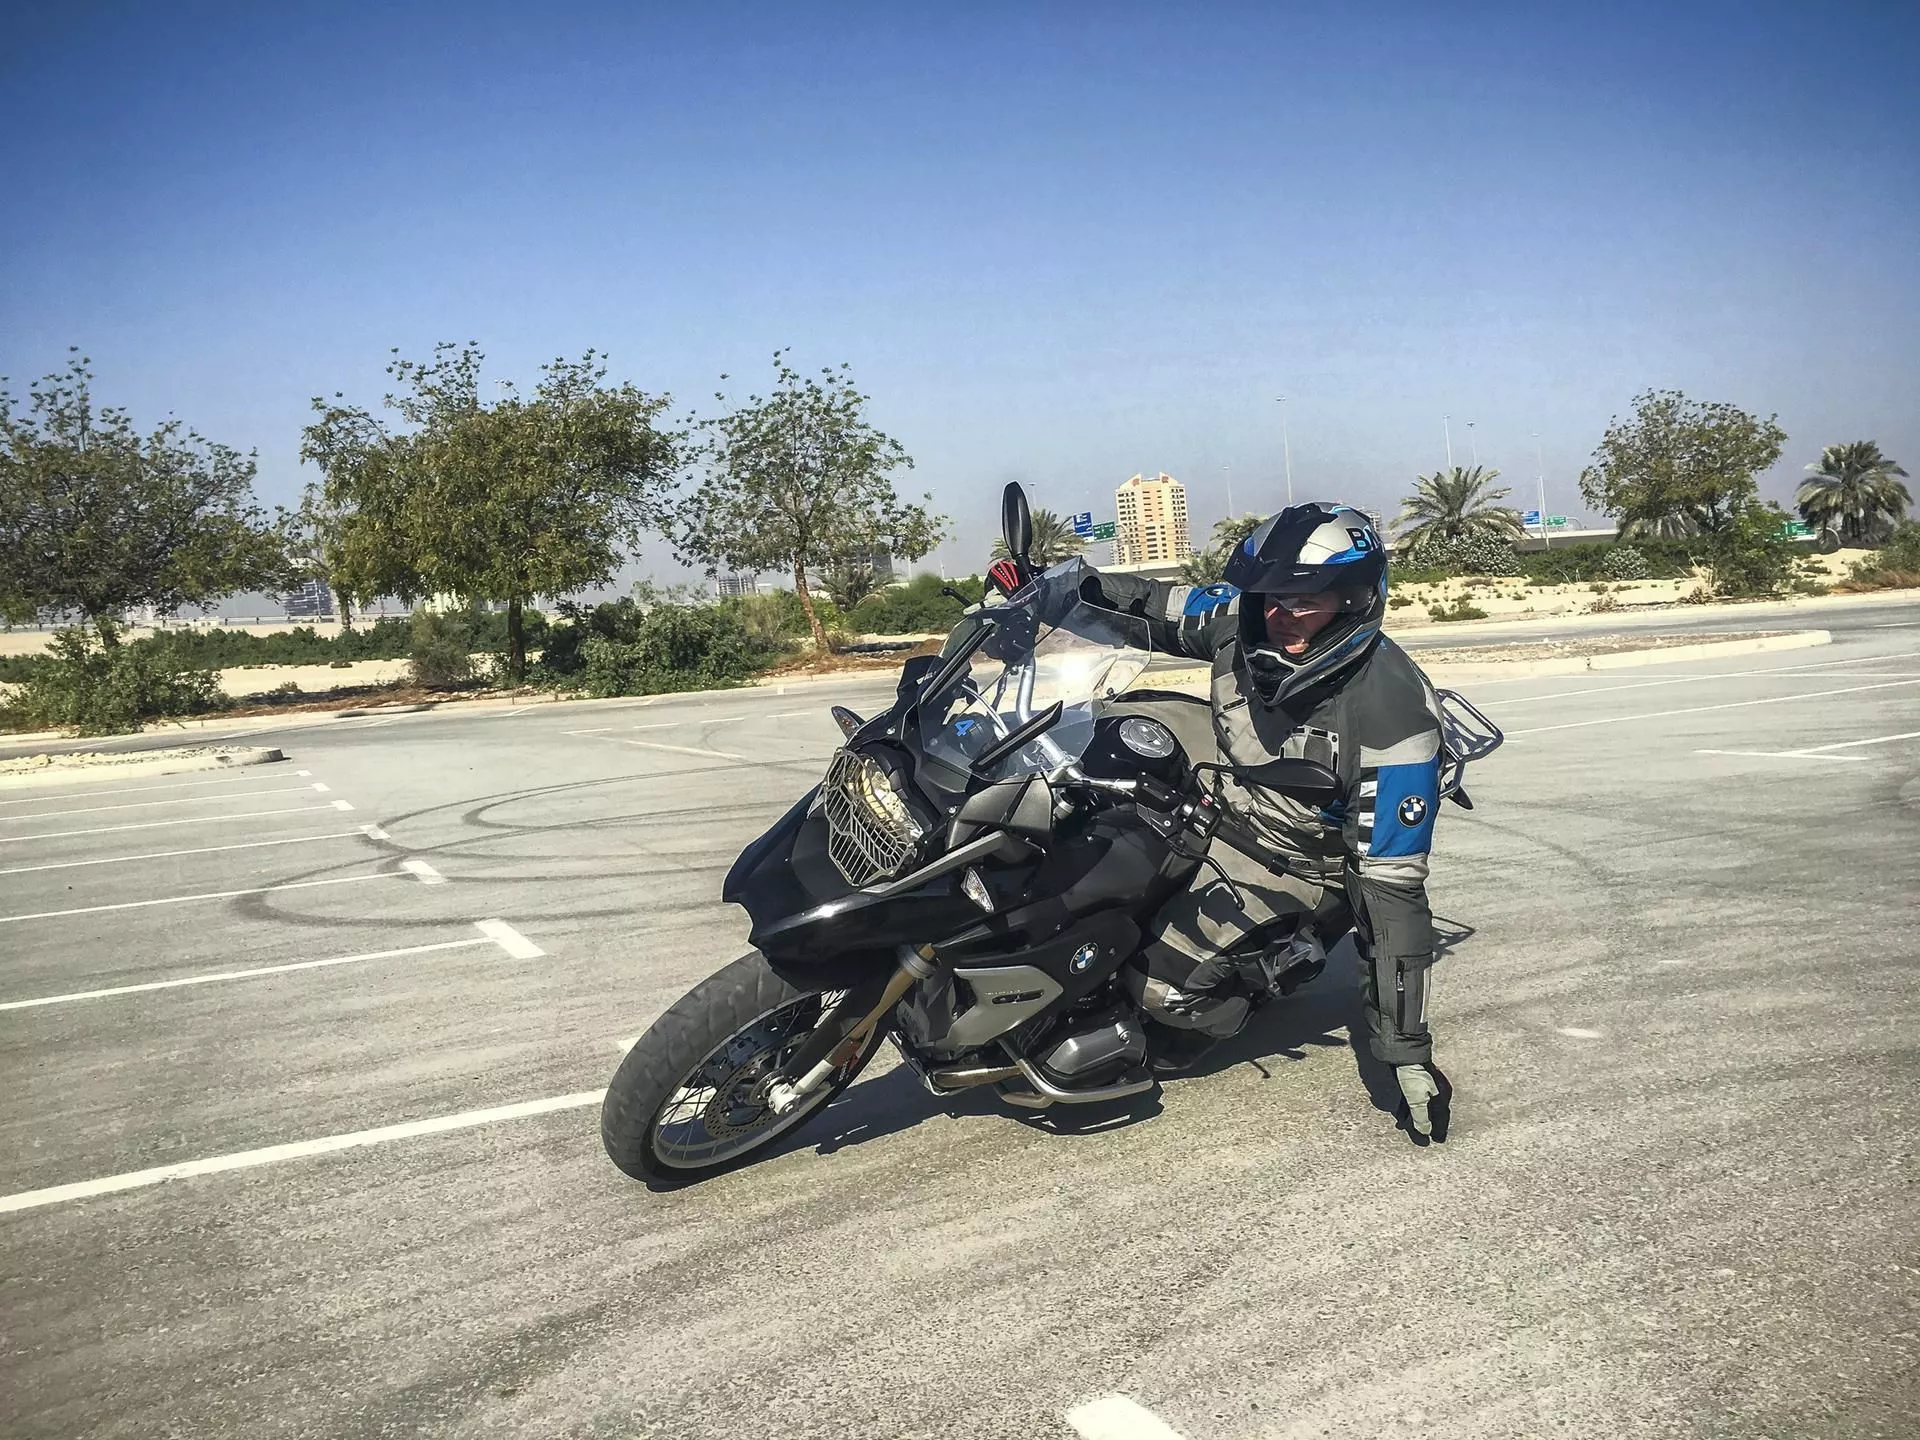 Egypt Motorcycle School (Omran) in Egypt, Africa | Motorcycles - Rated 0.9